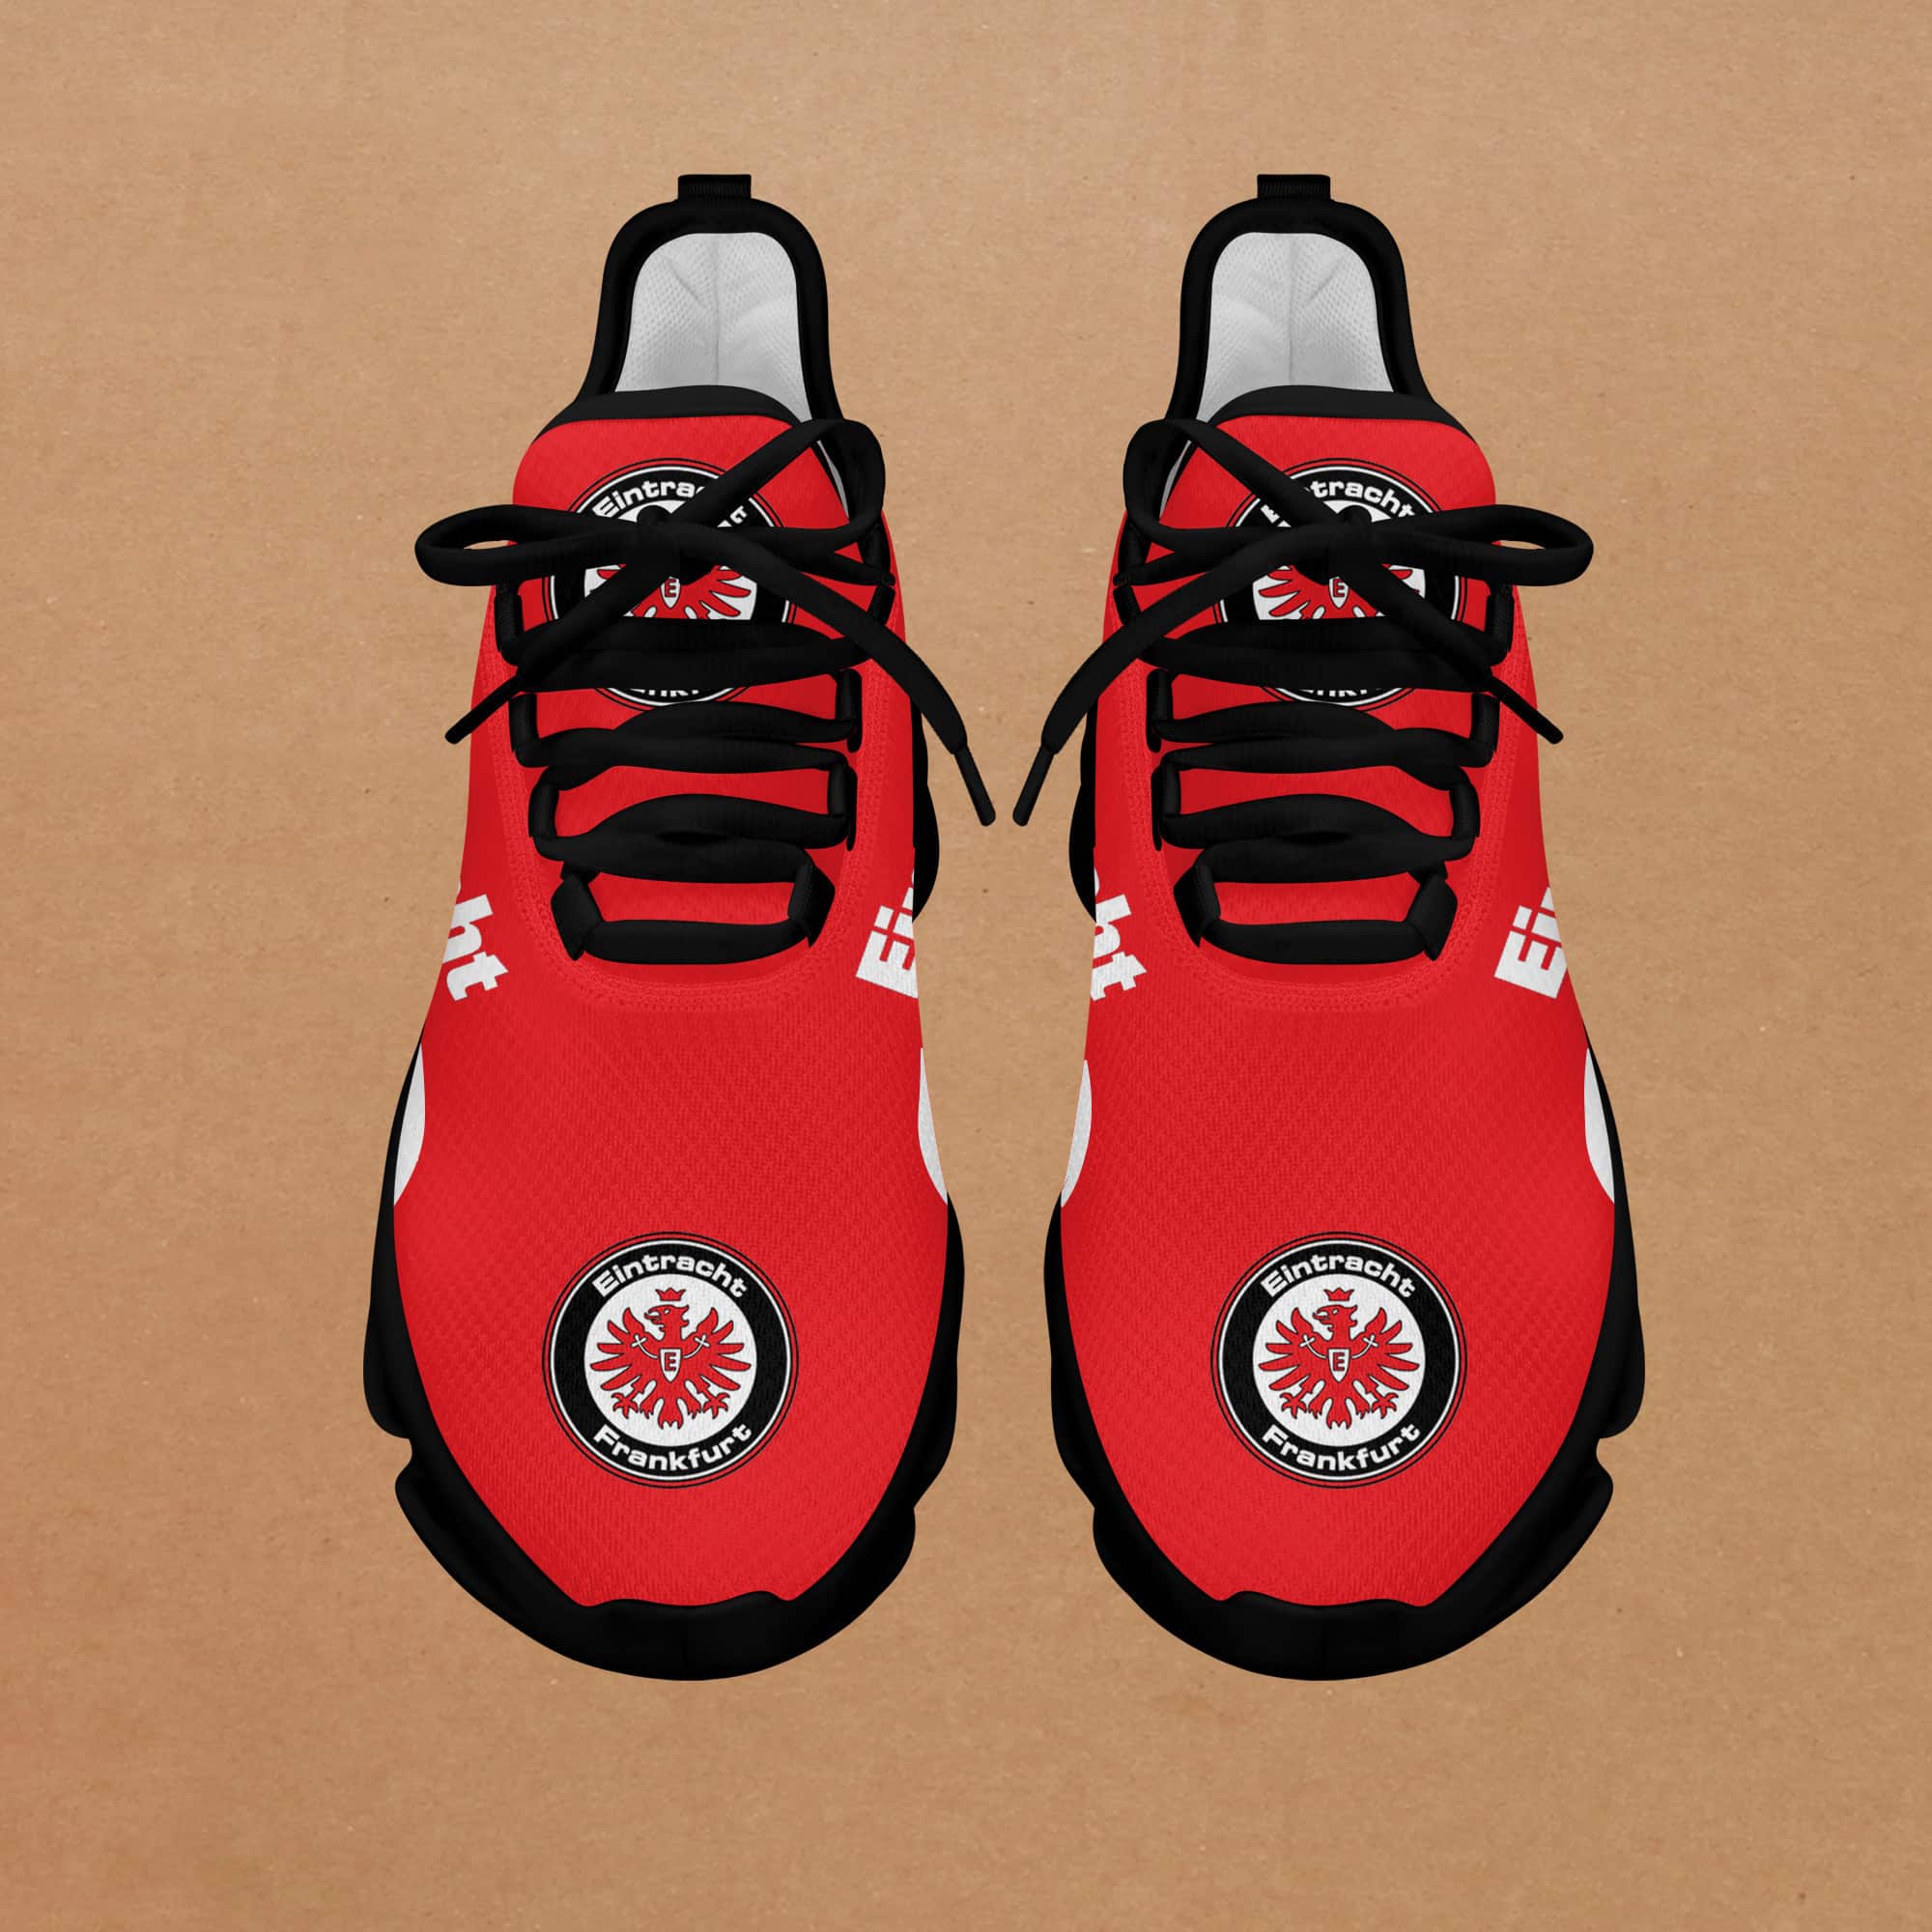 Eintracht Frankfurt Running Shoes Max Soul Shoes Sneakers Ver 6 4